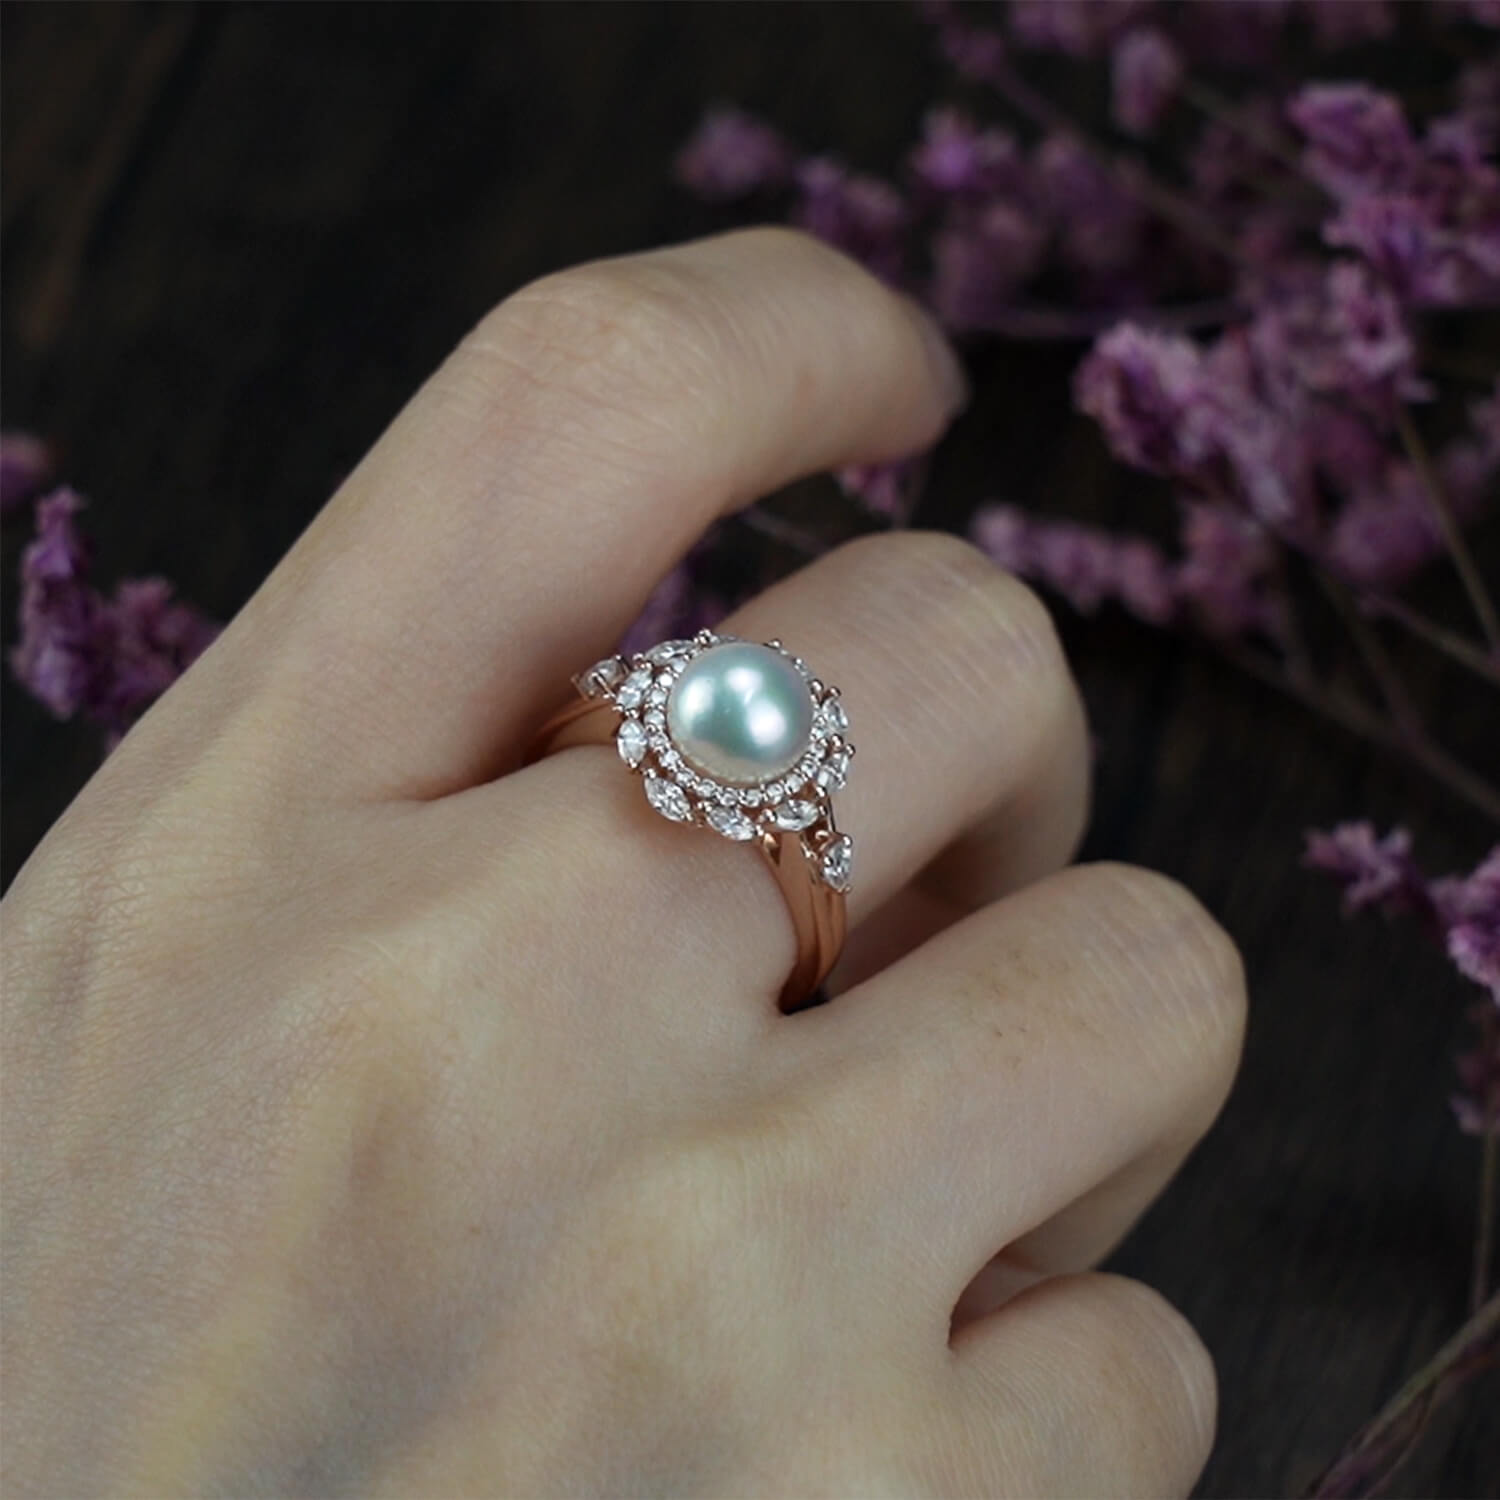 Pearl Blossom Ring - Ethereal Akoya Pearl & Moissanite Petals Ring, halo ring, engagement ring for women gift, anniversary rings